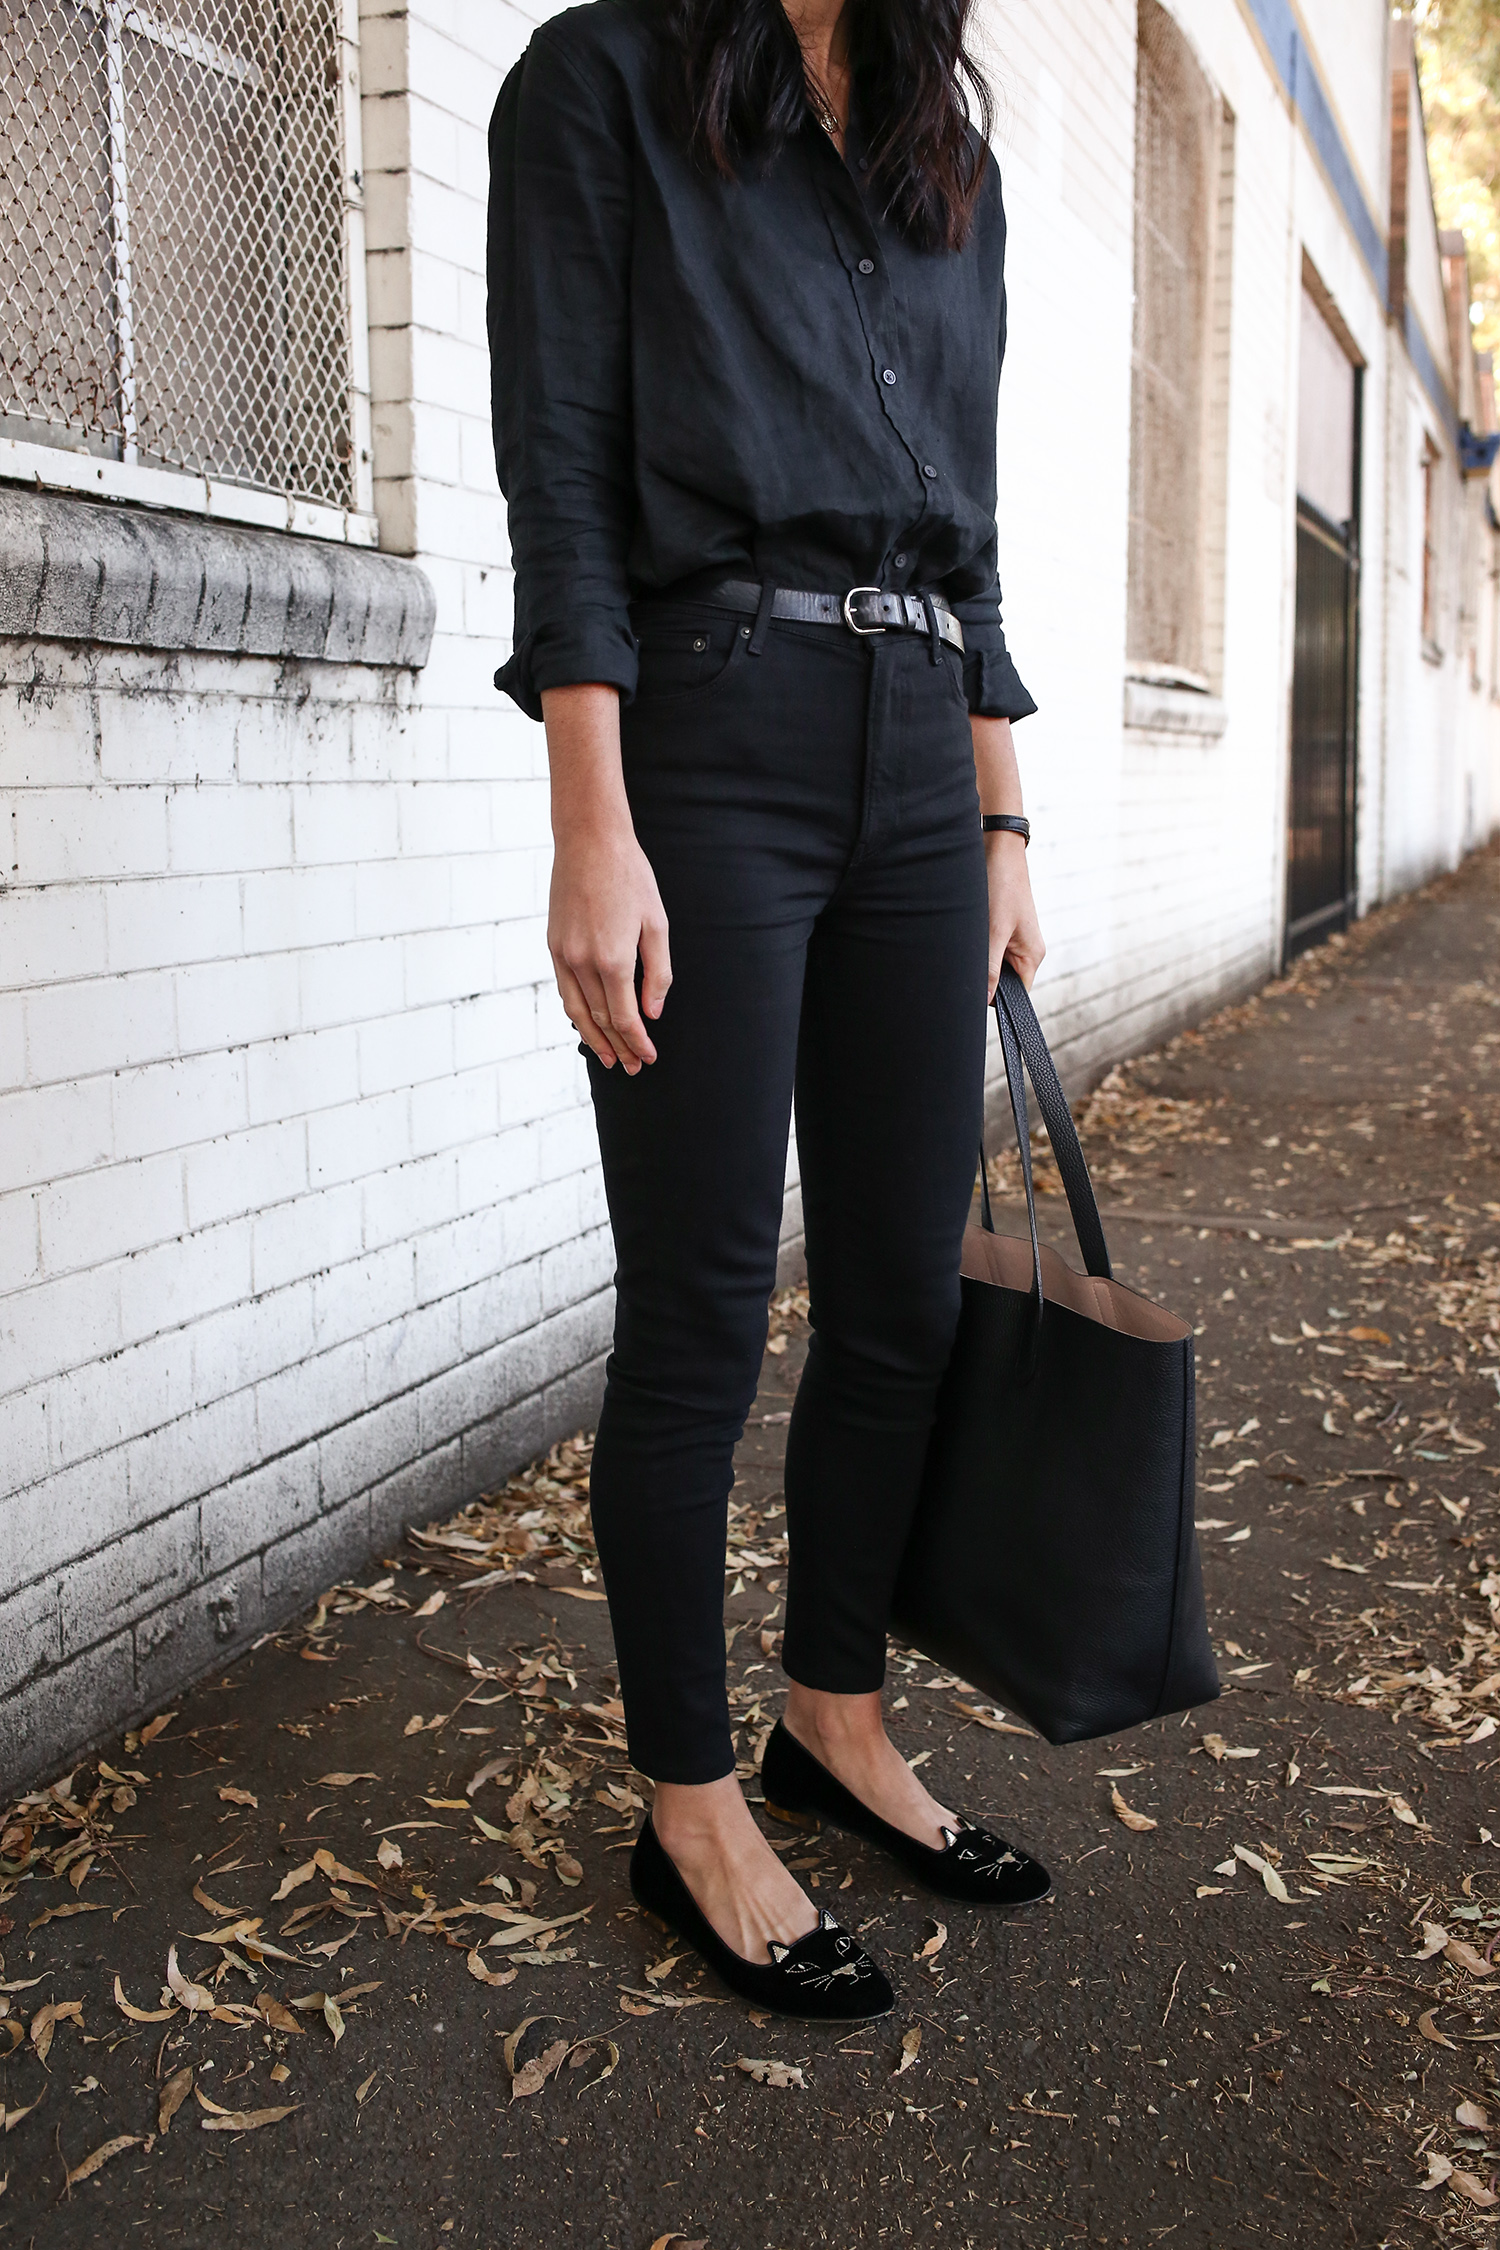 Wearing an all black outfit - Mademoiselle